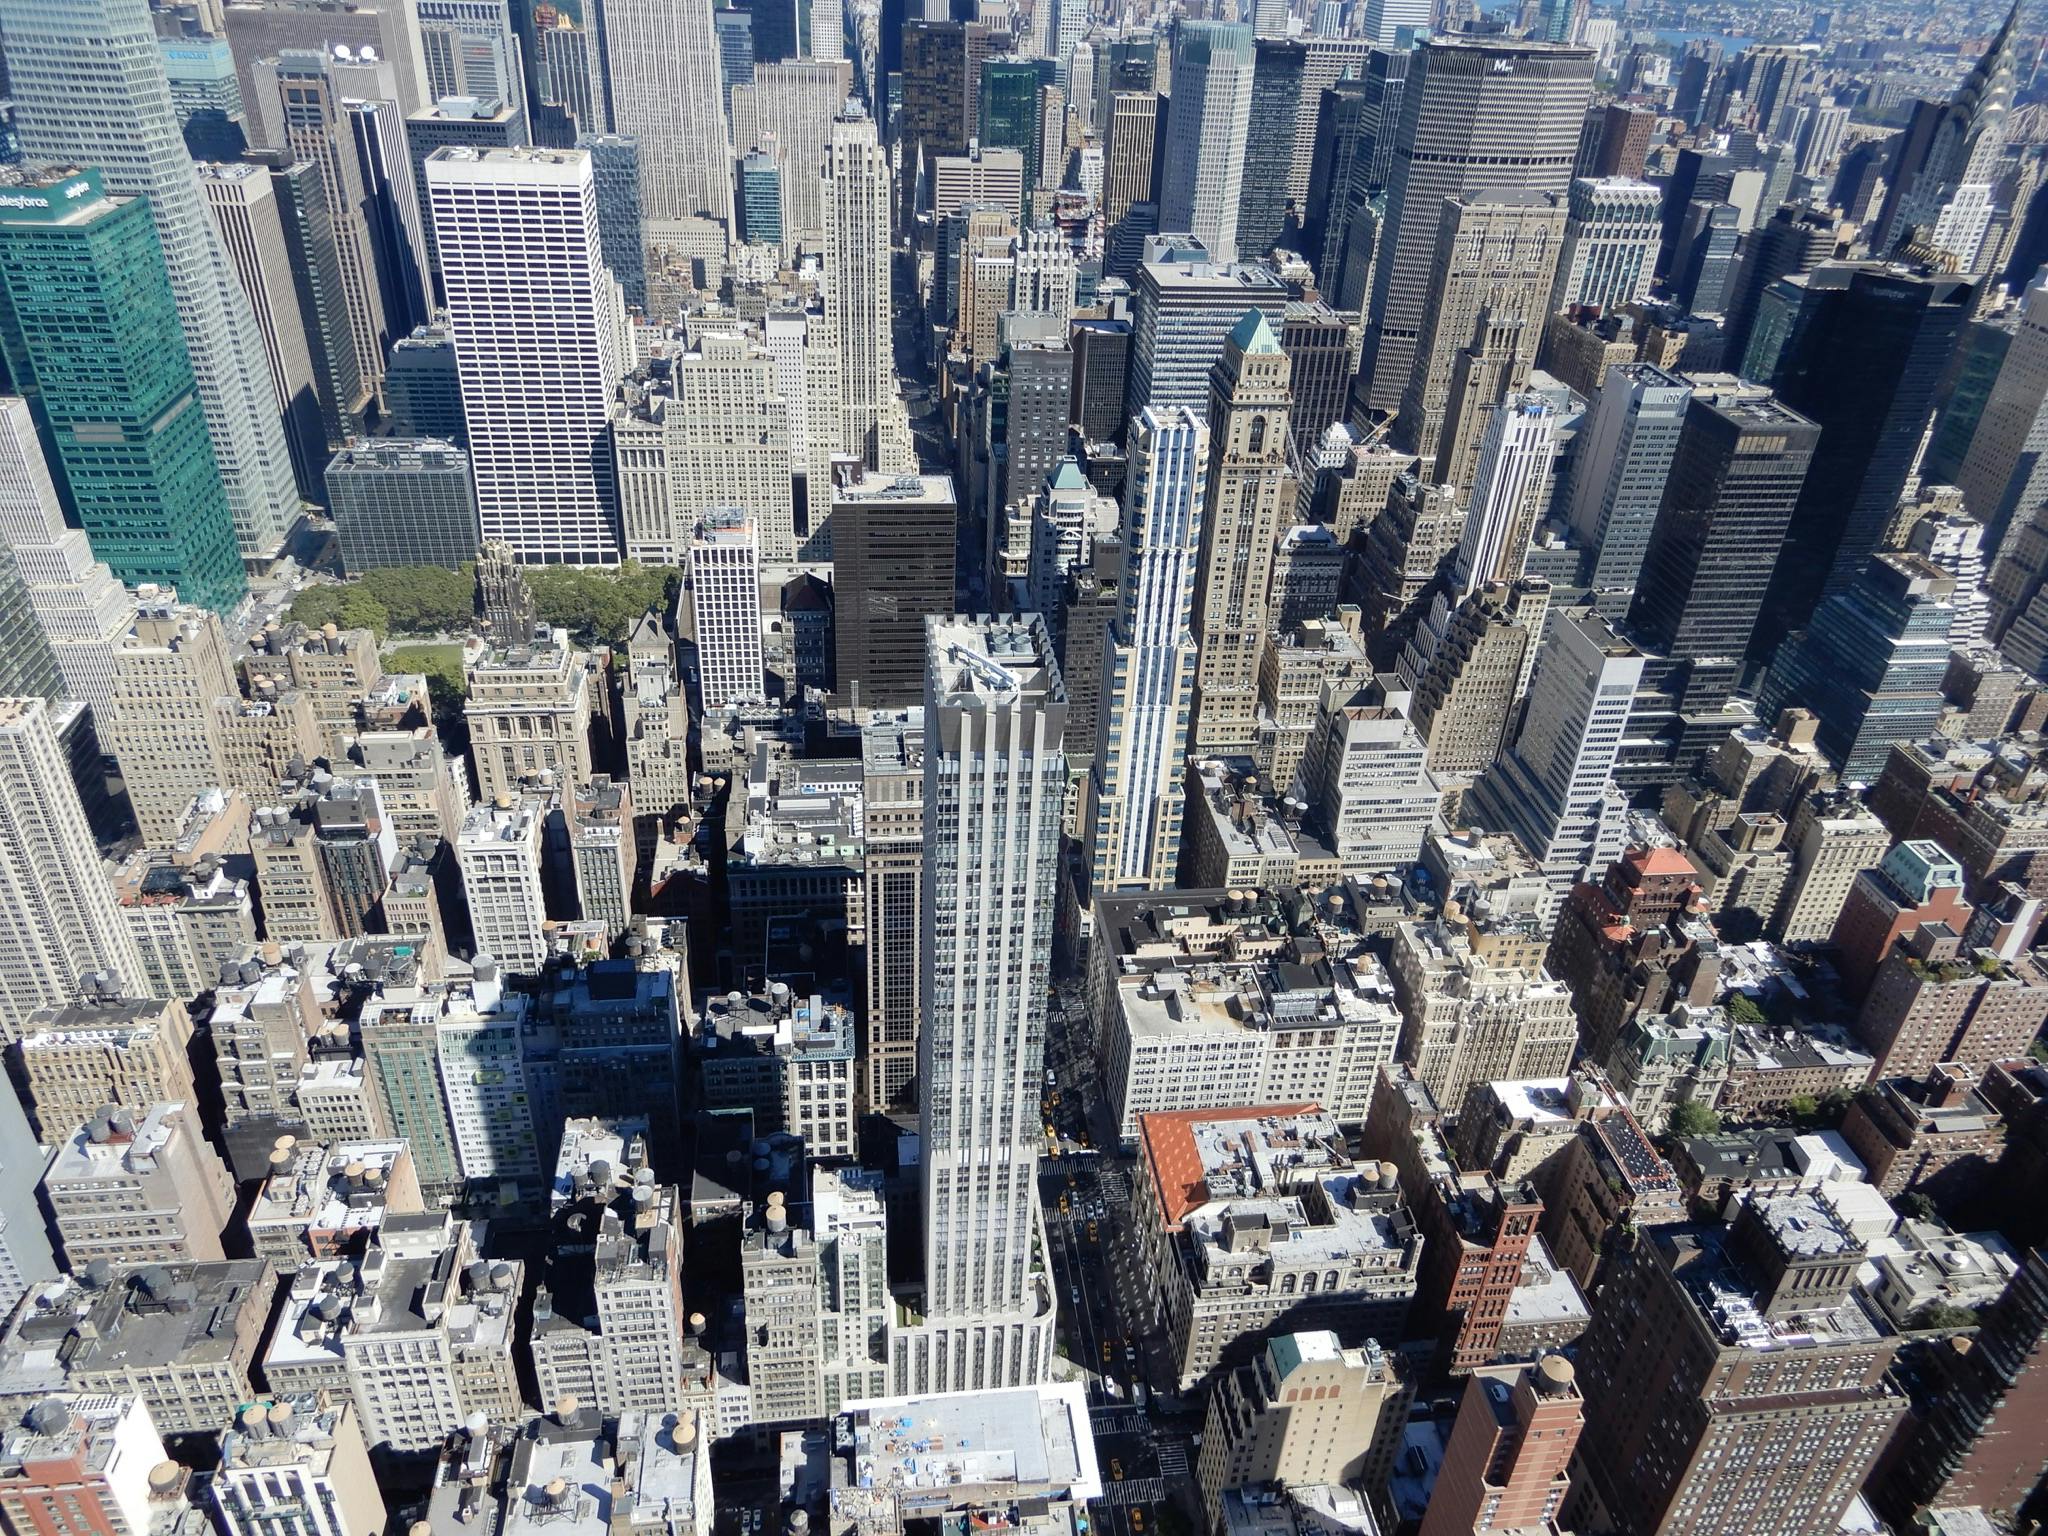 Free stock photo of Looking down from the Empire States Building